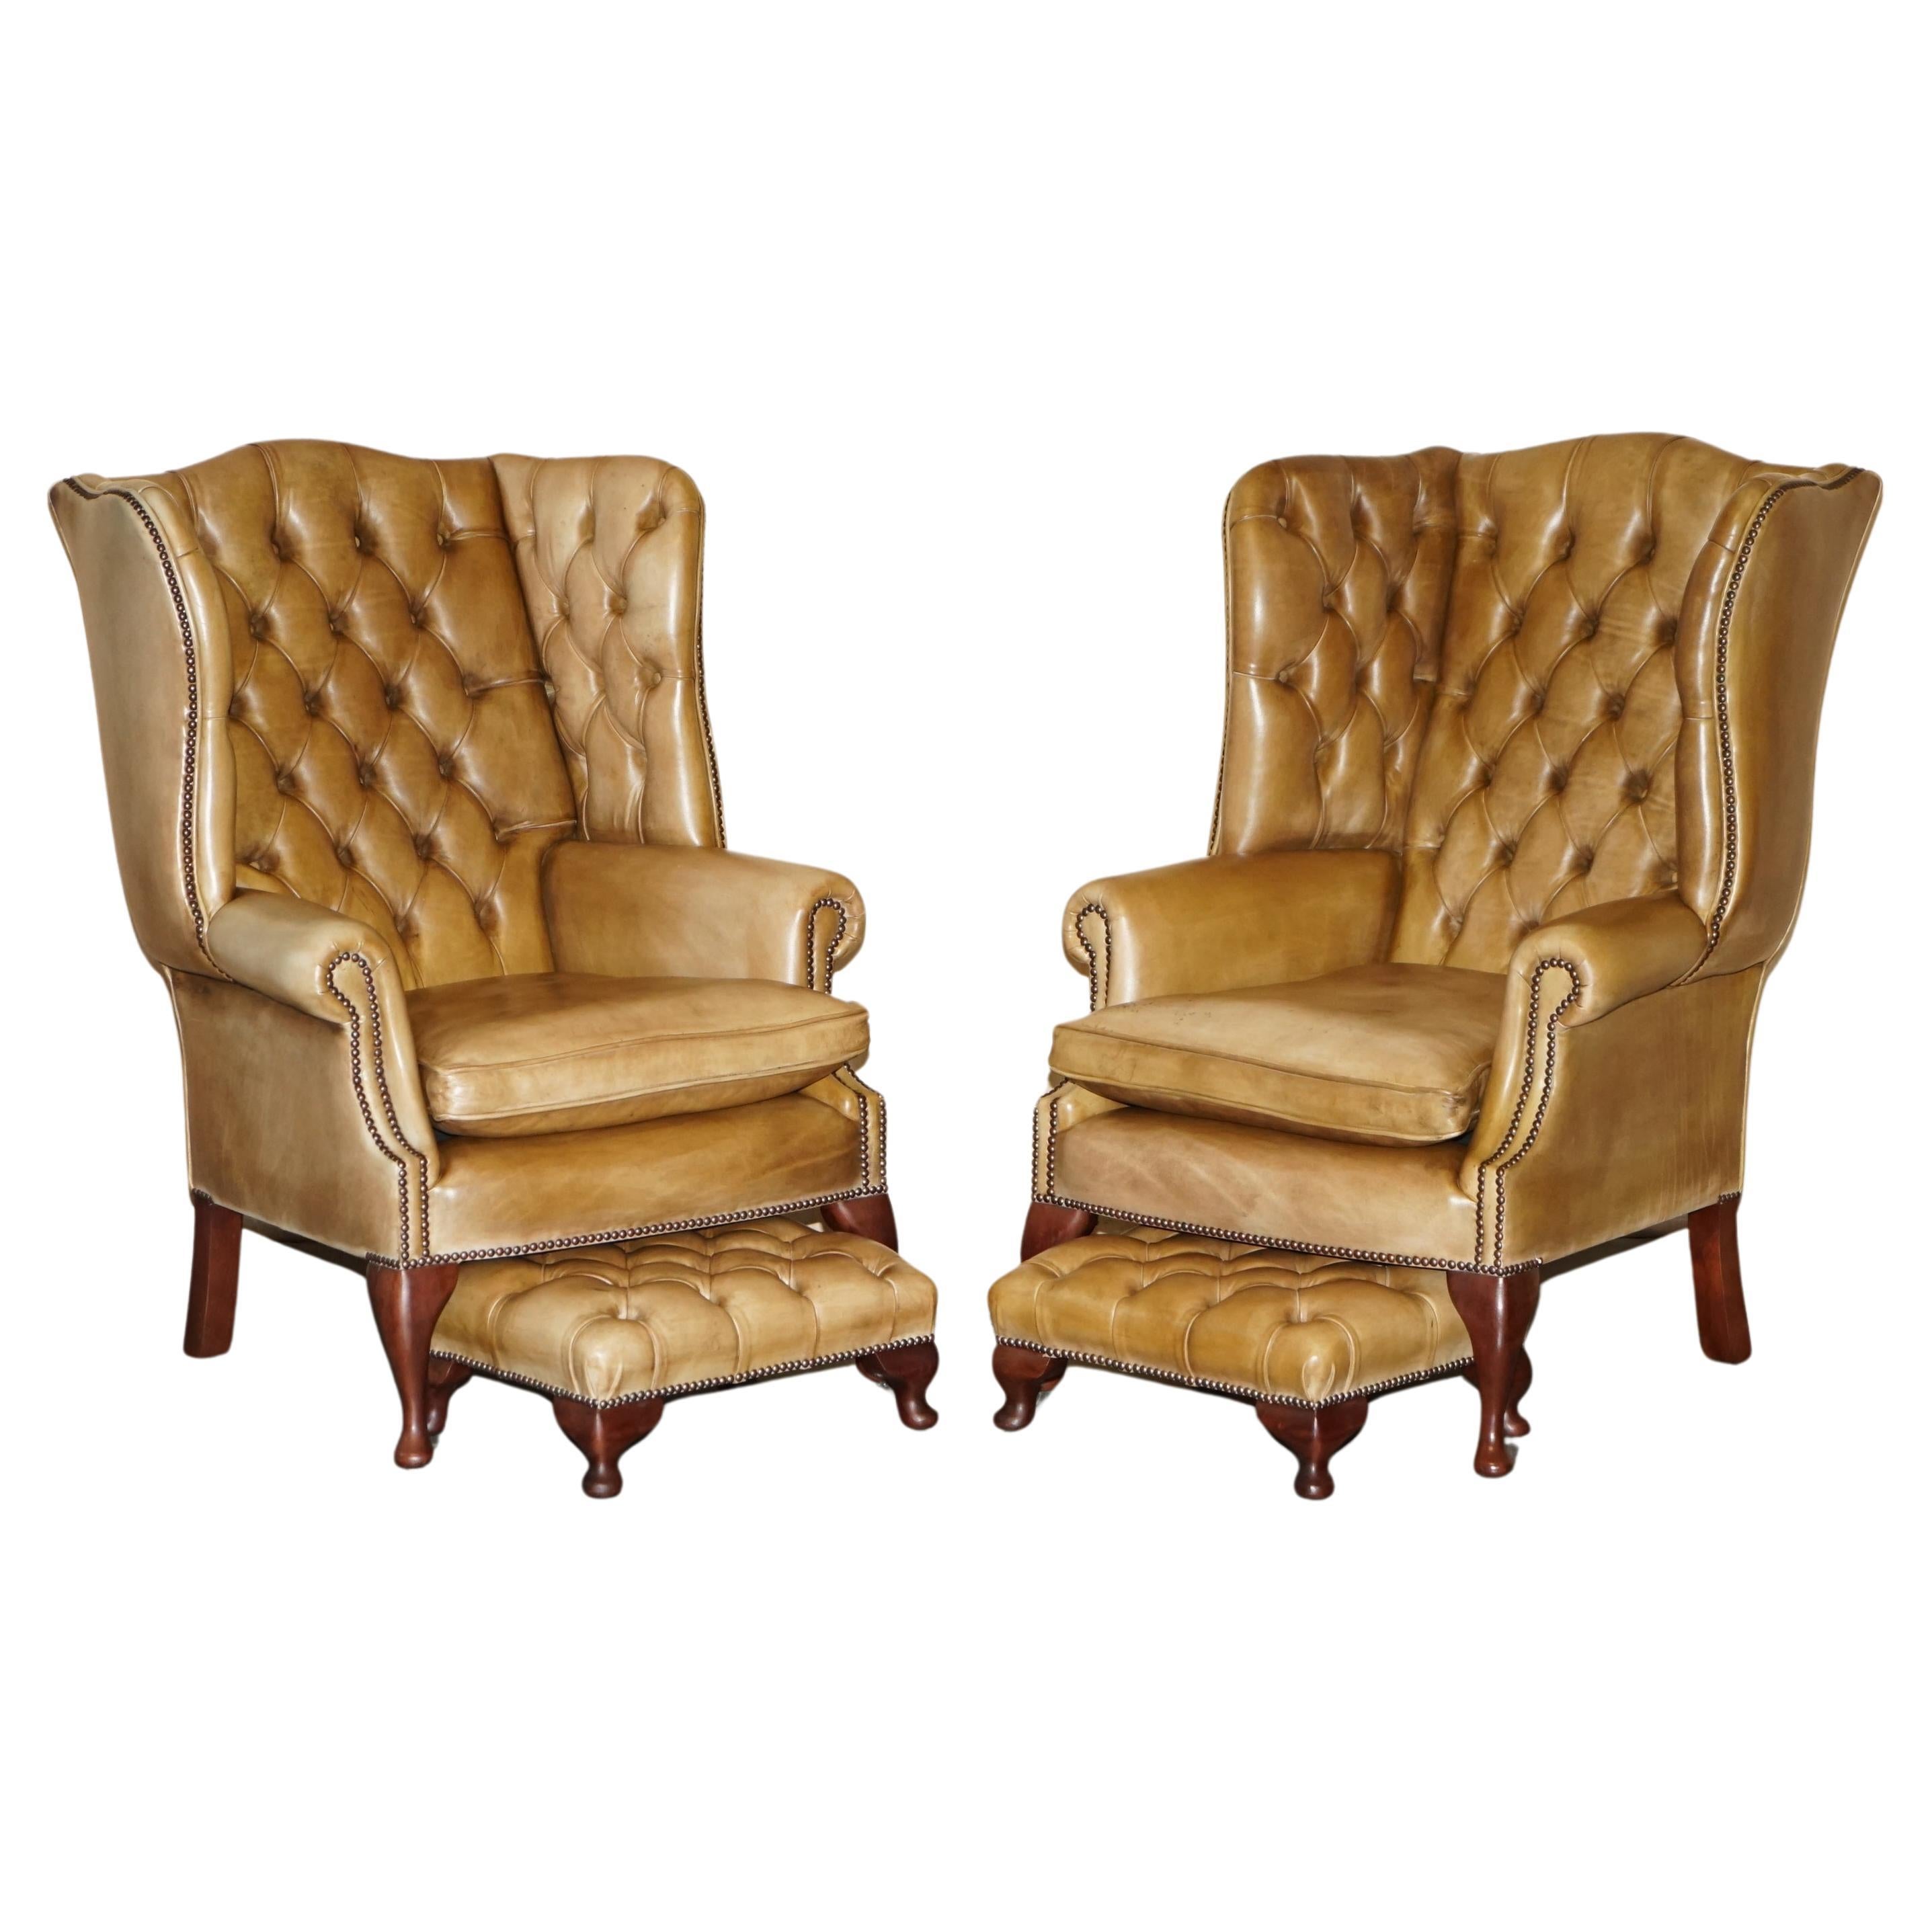 PAIR OF VINTAGE TAN BROWN LEATHER CHESTERFiELD WINGBACK CHAIRS WITH FOOTSTOOLS